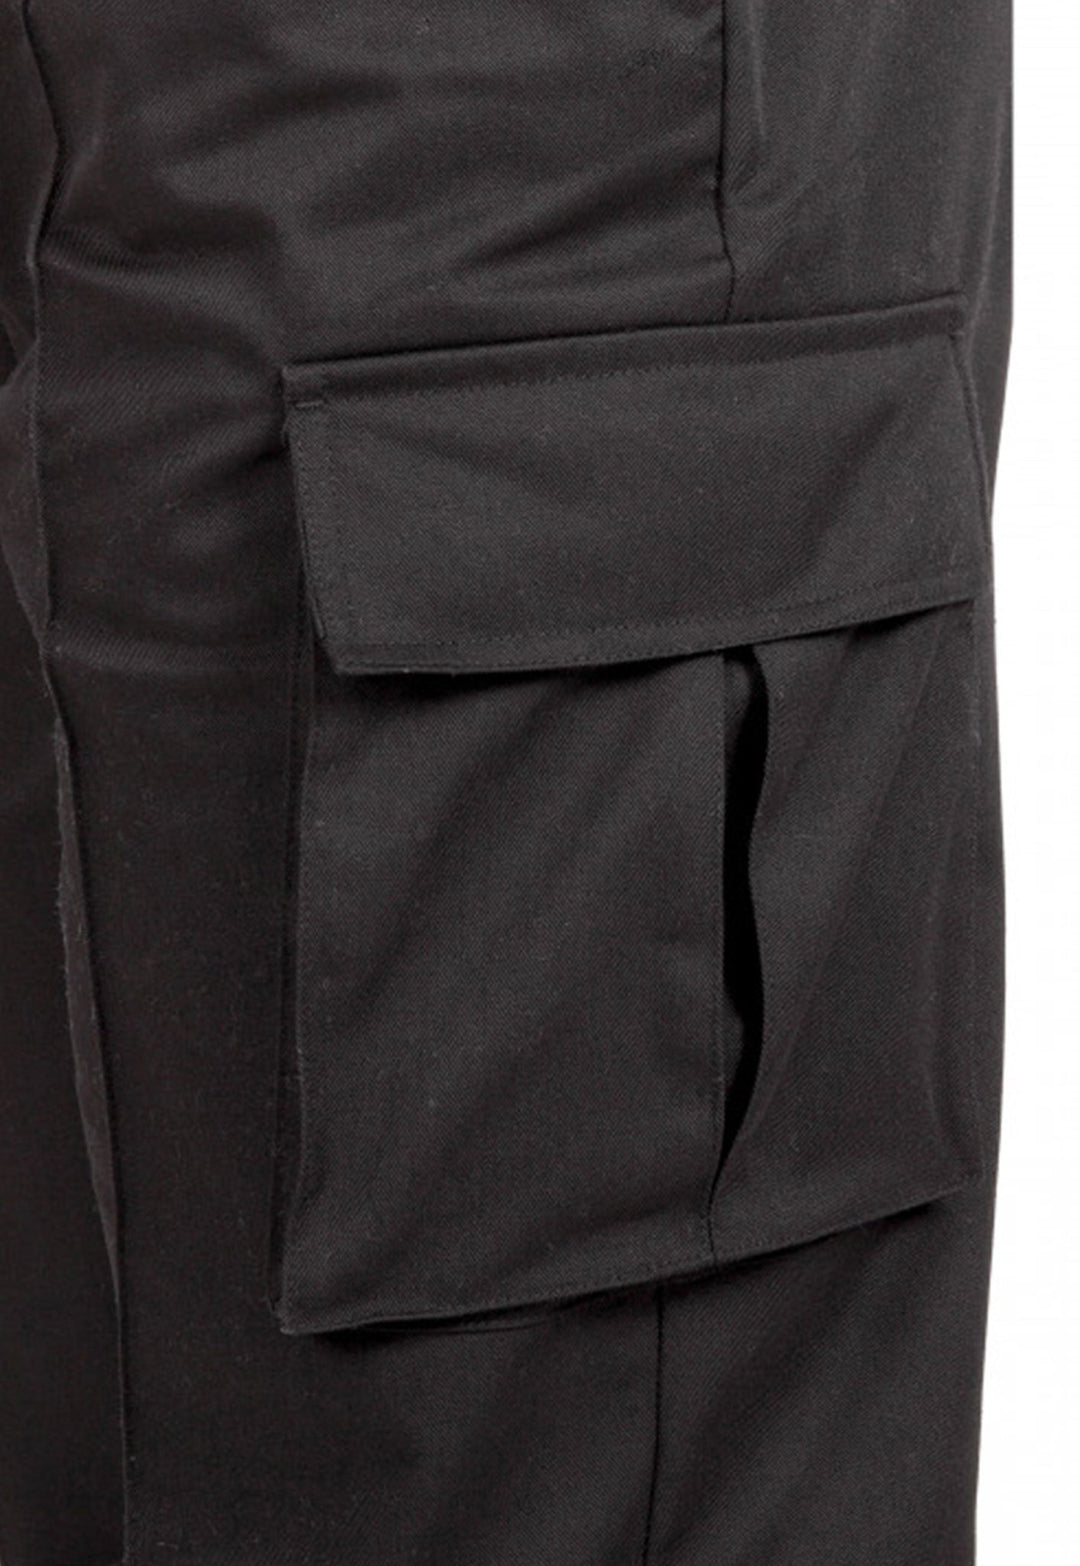 OPGear Security Cargo Trousers - The Work Uniform Company